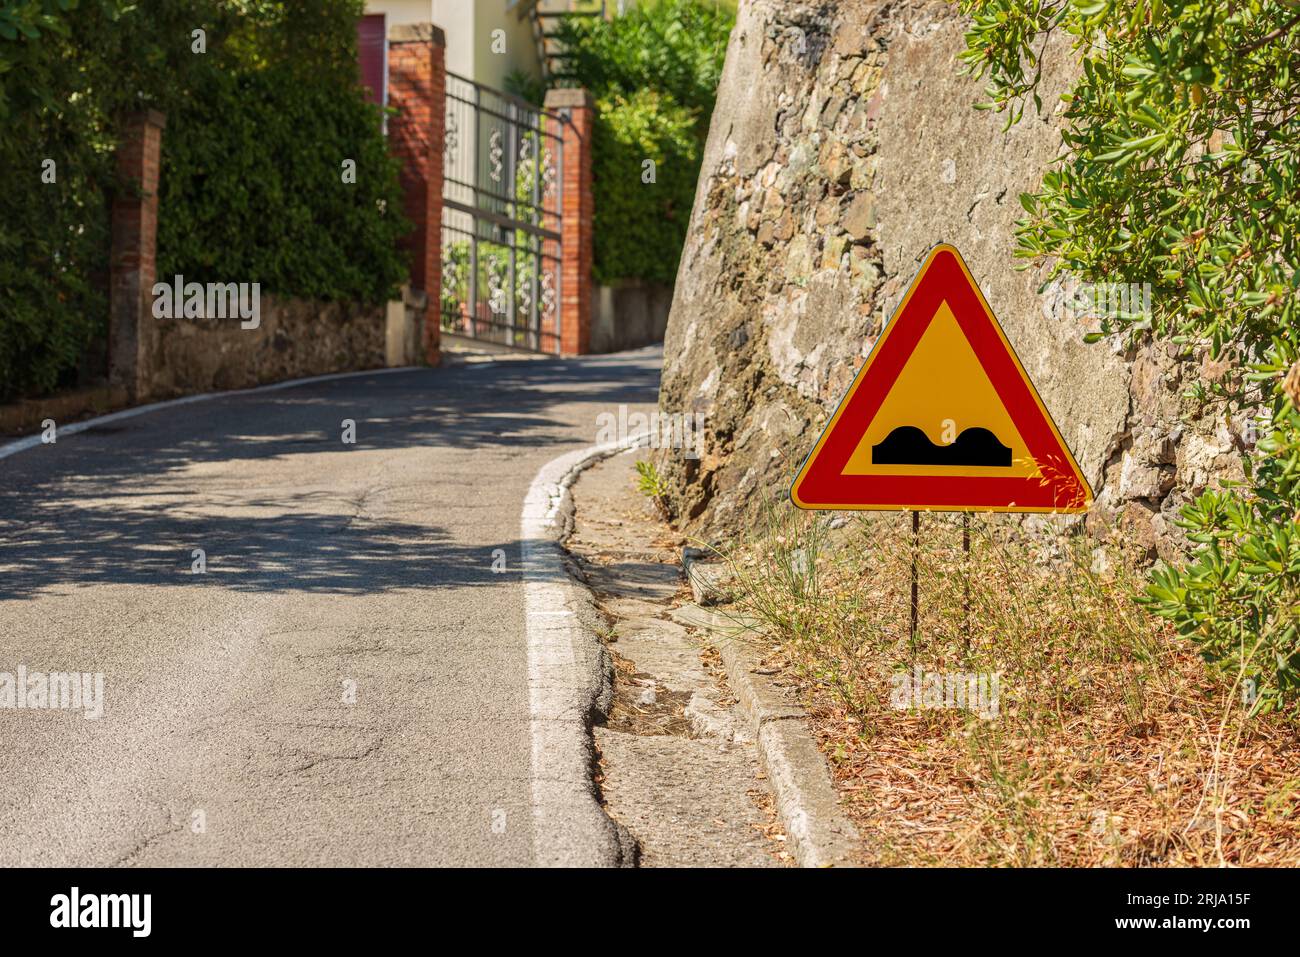 Triangular road sign of bumpy road. It is a danger sign that announces a deformed road, in bad condition, uneven or with irregular pavement. Stock Photo